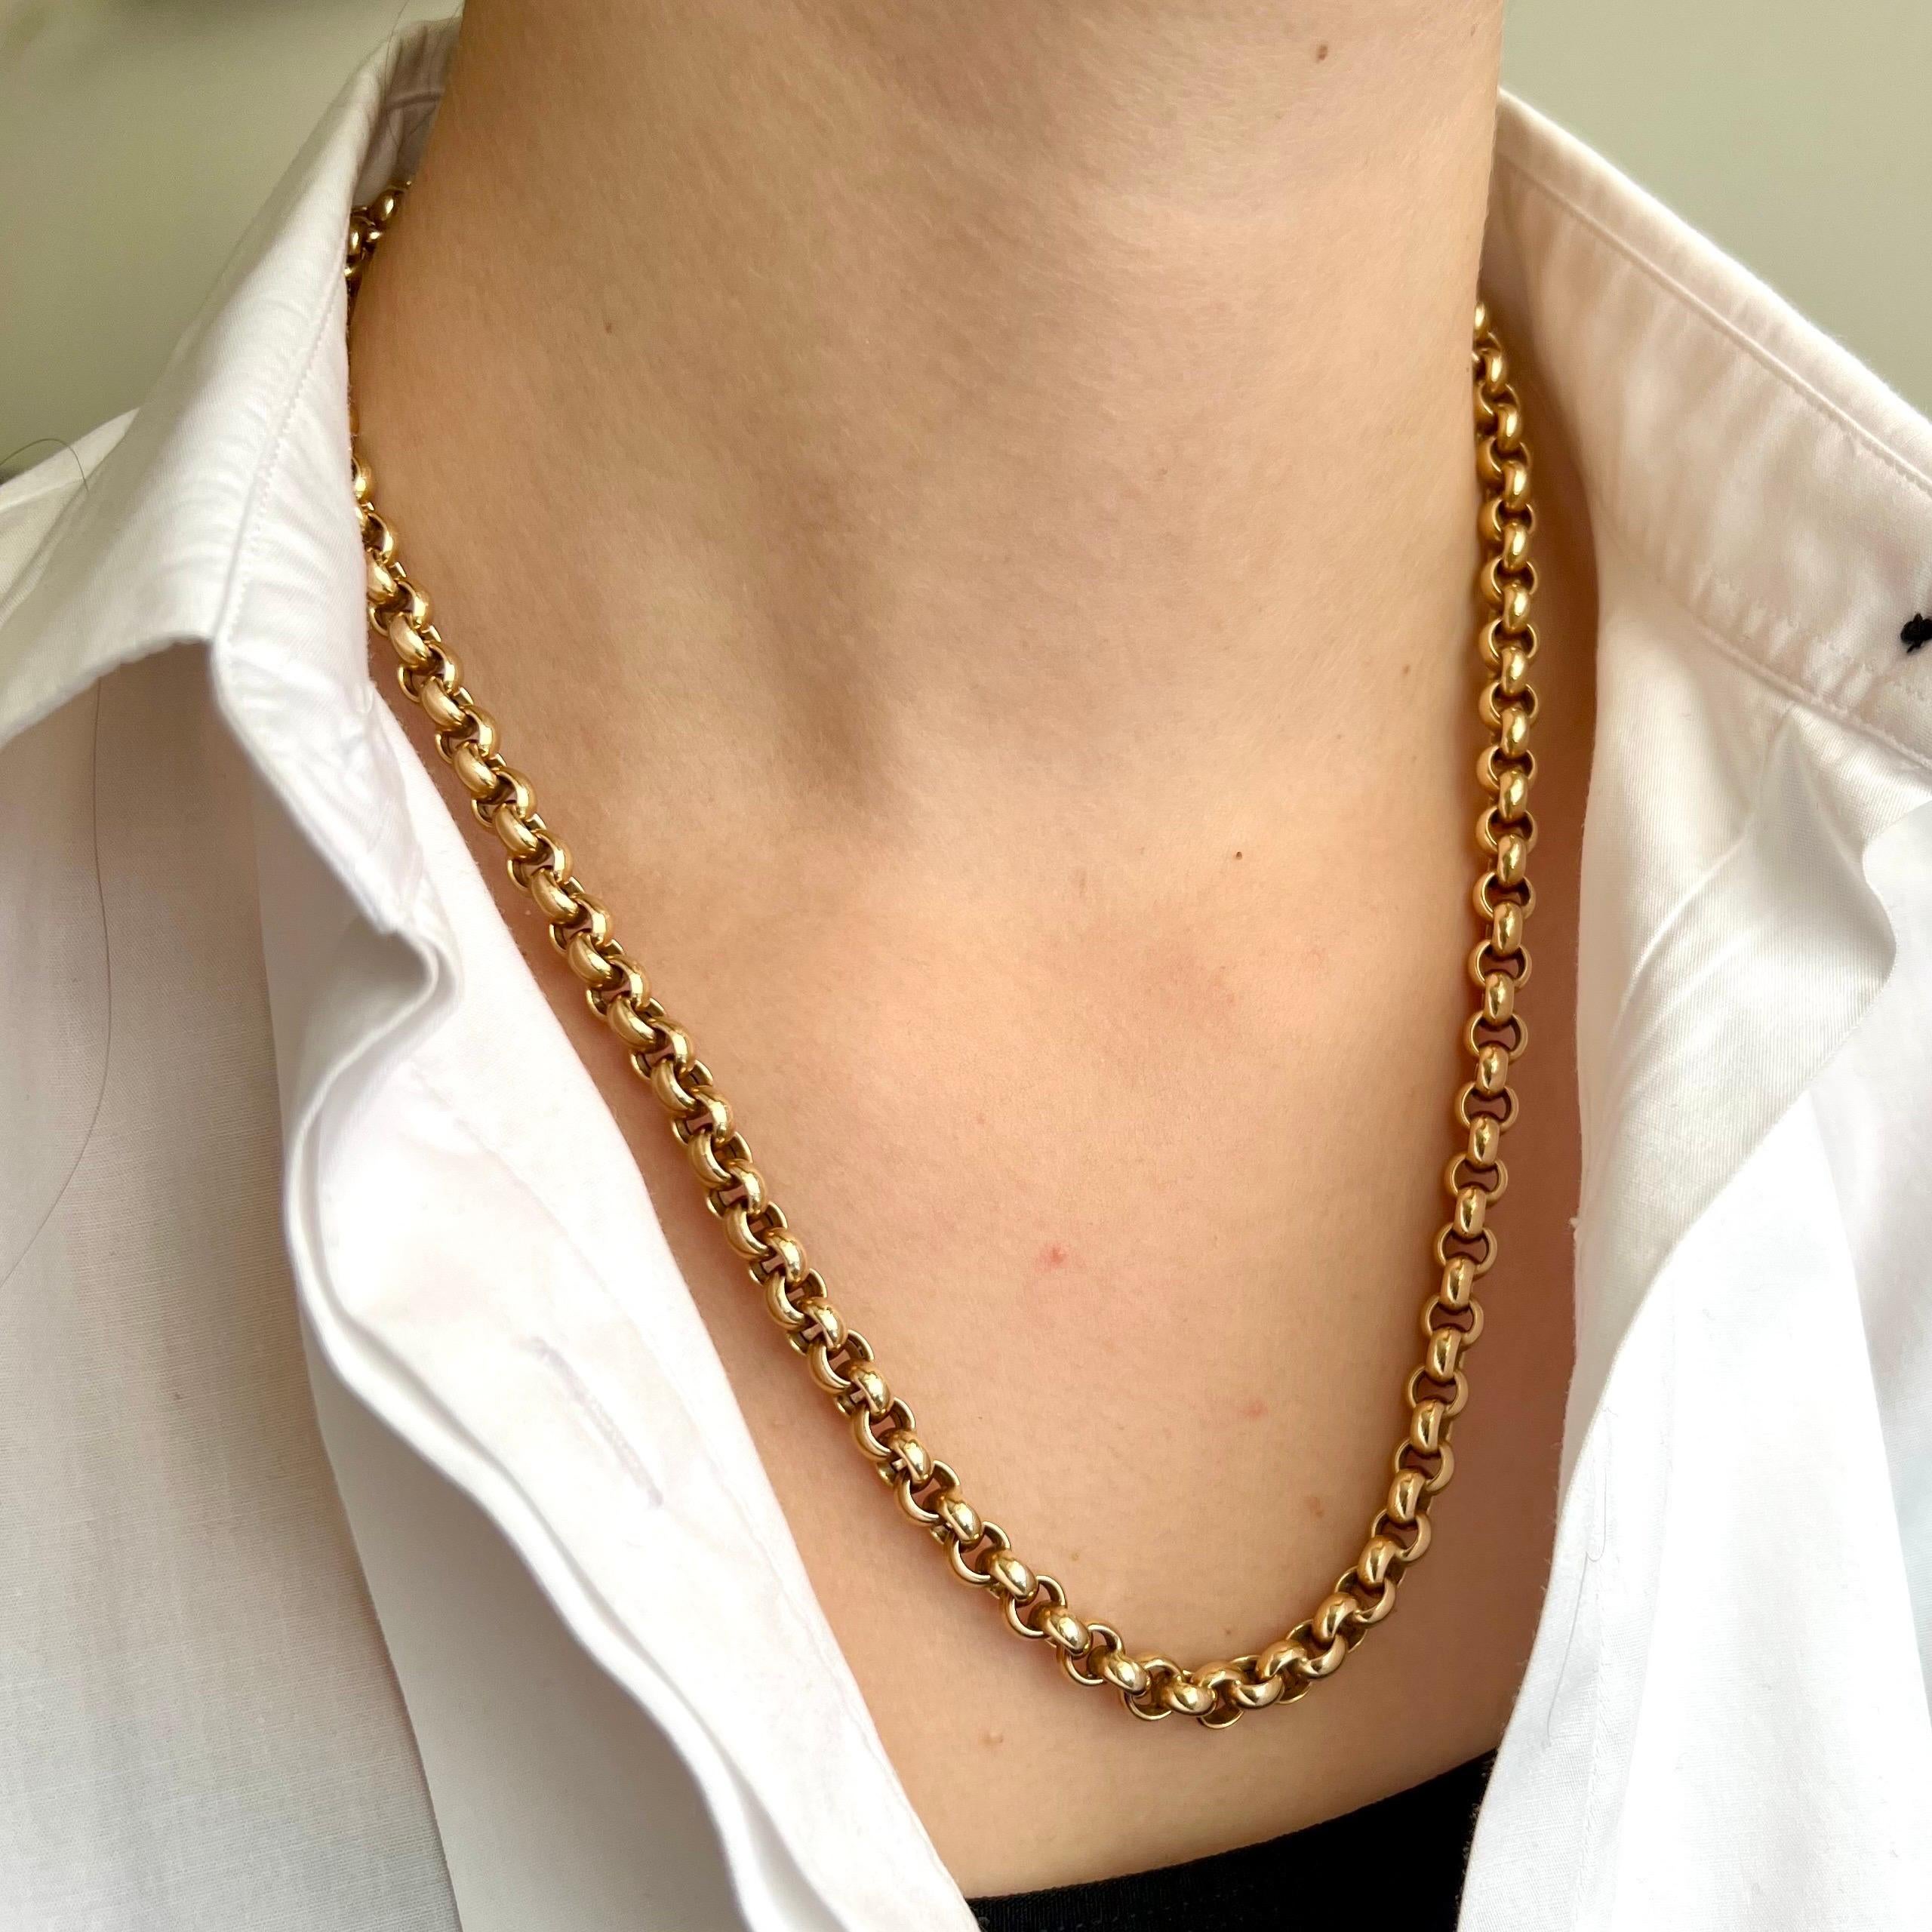 A beautiful 14 karat gold vintage belcher rolo chain necklace. Each round link has a perfect polish and each link is woven together into this gorgeous chain. The necklace is ready to wear alone or layered with your other favorite necklaces, this